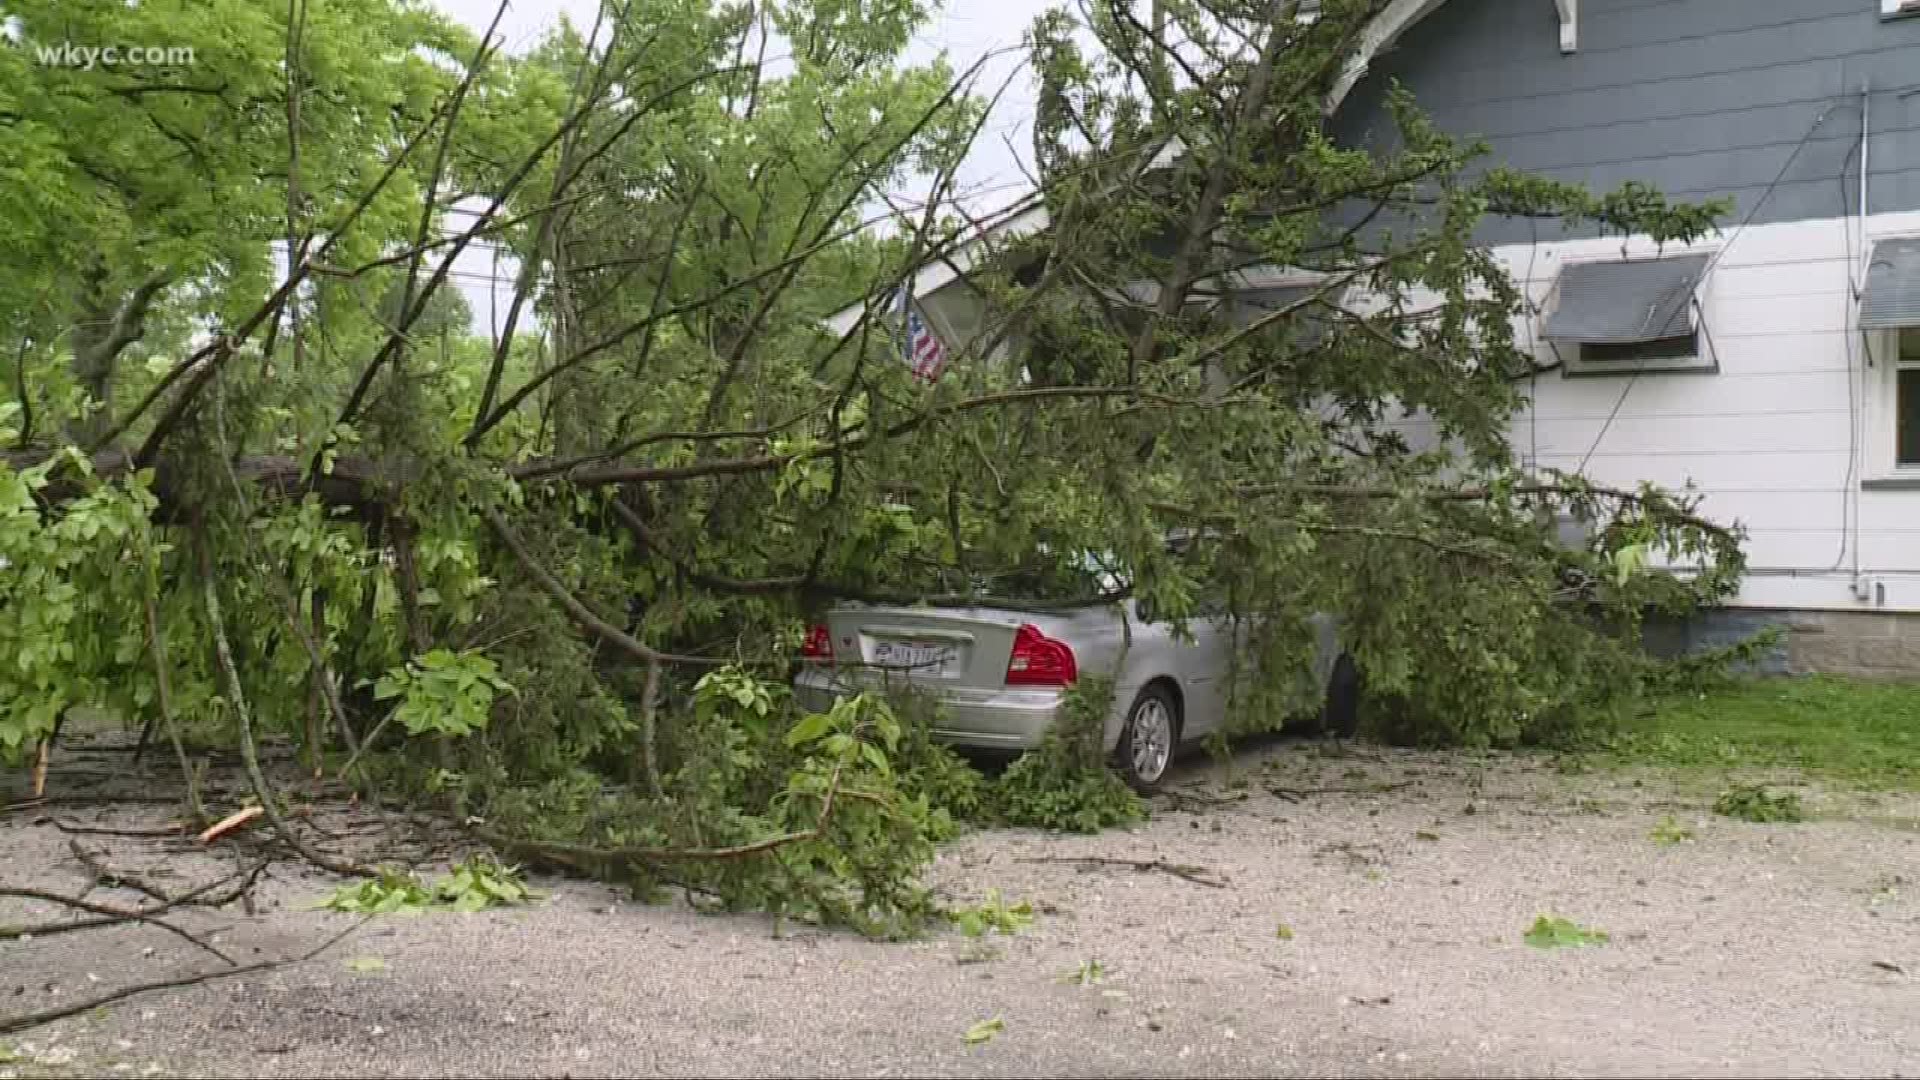 Damage to homes, downed power lines, and flooding were reported from Solon to Warren on Sunday.